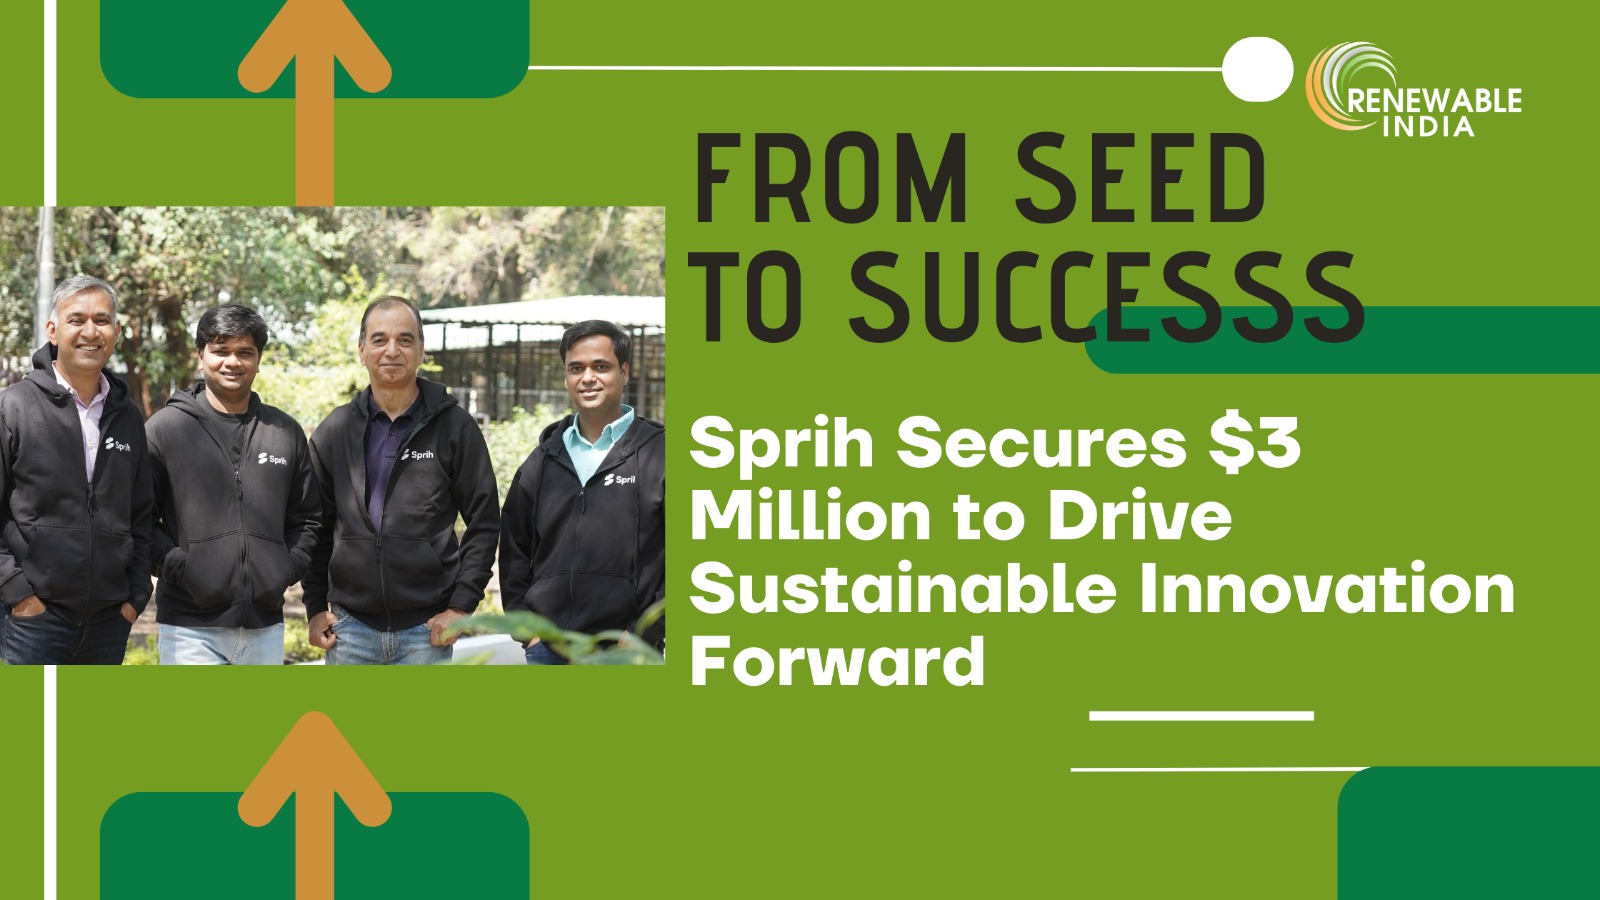 Climate Tech startup Sprih secures $3 Million in Seed Funding led by Leo Capital